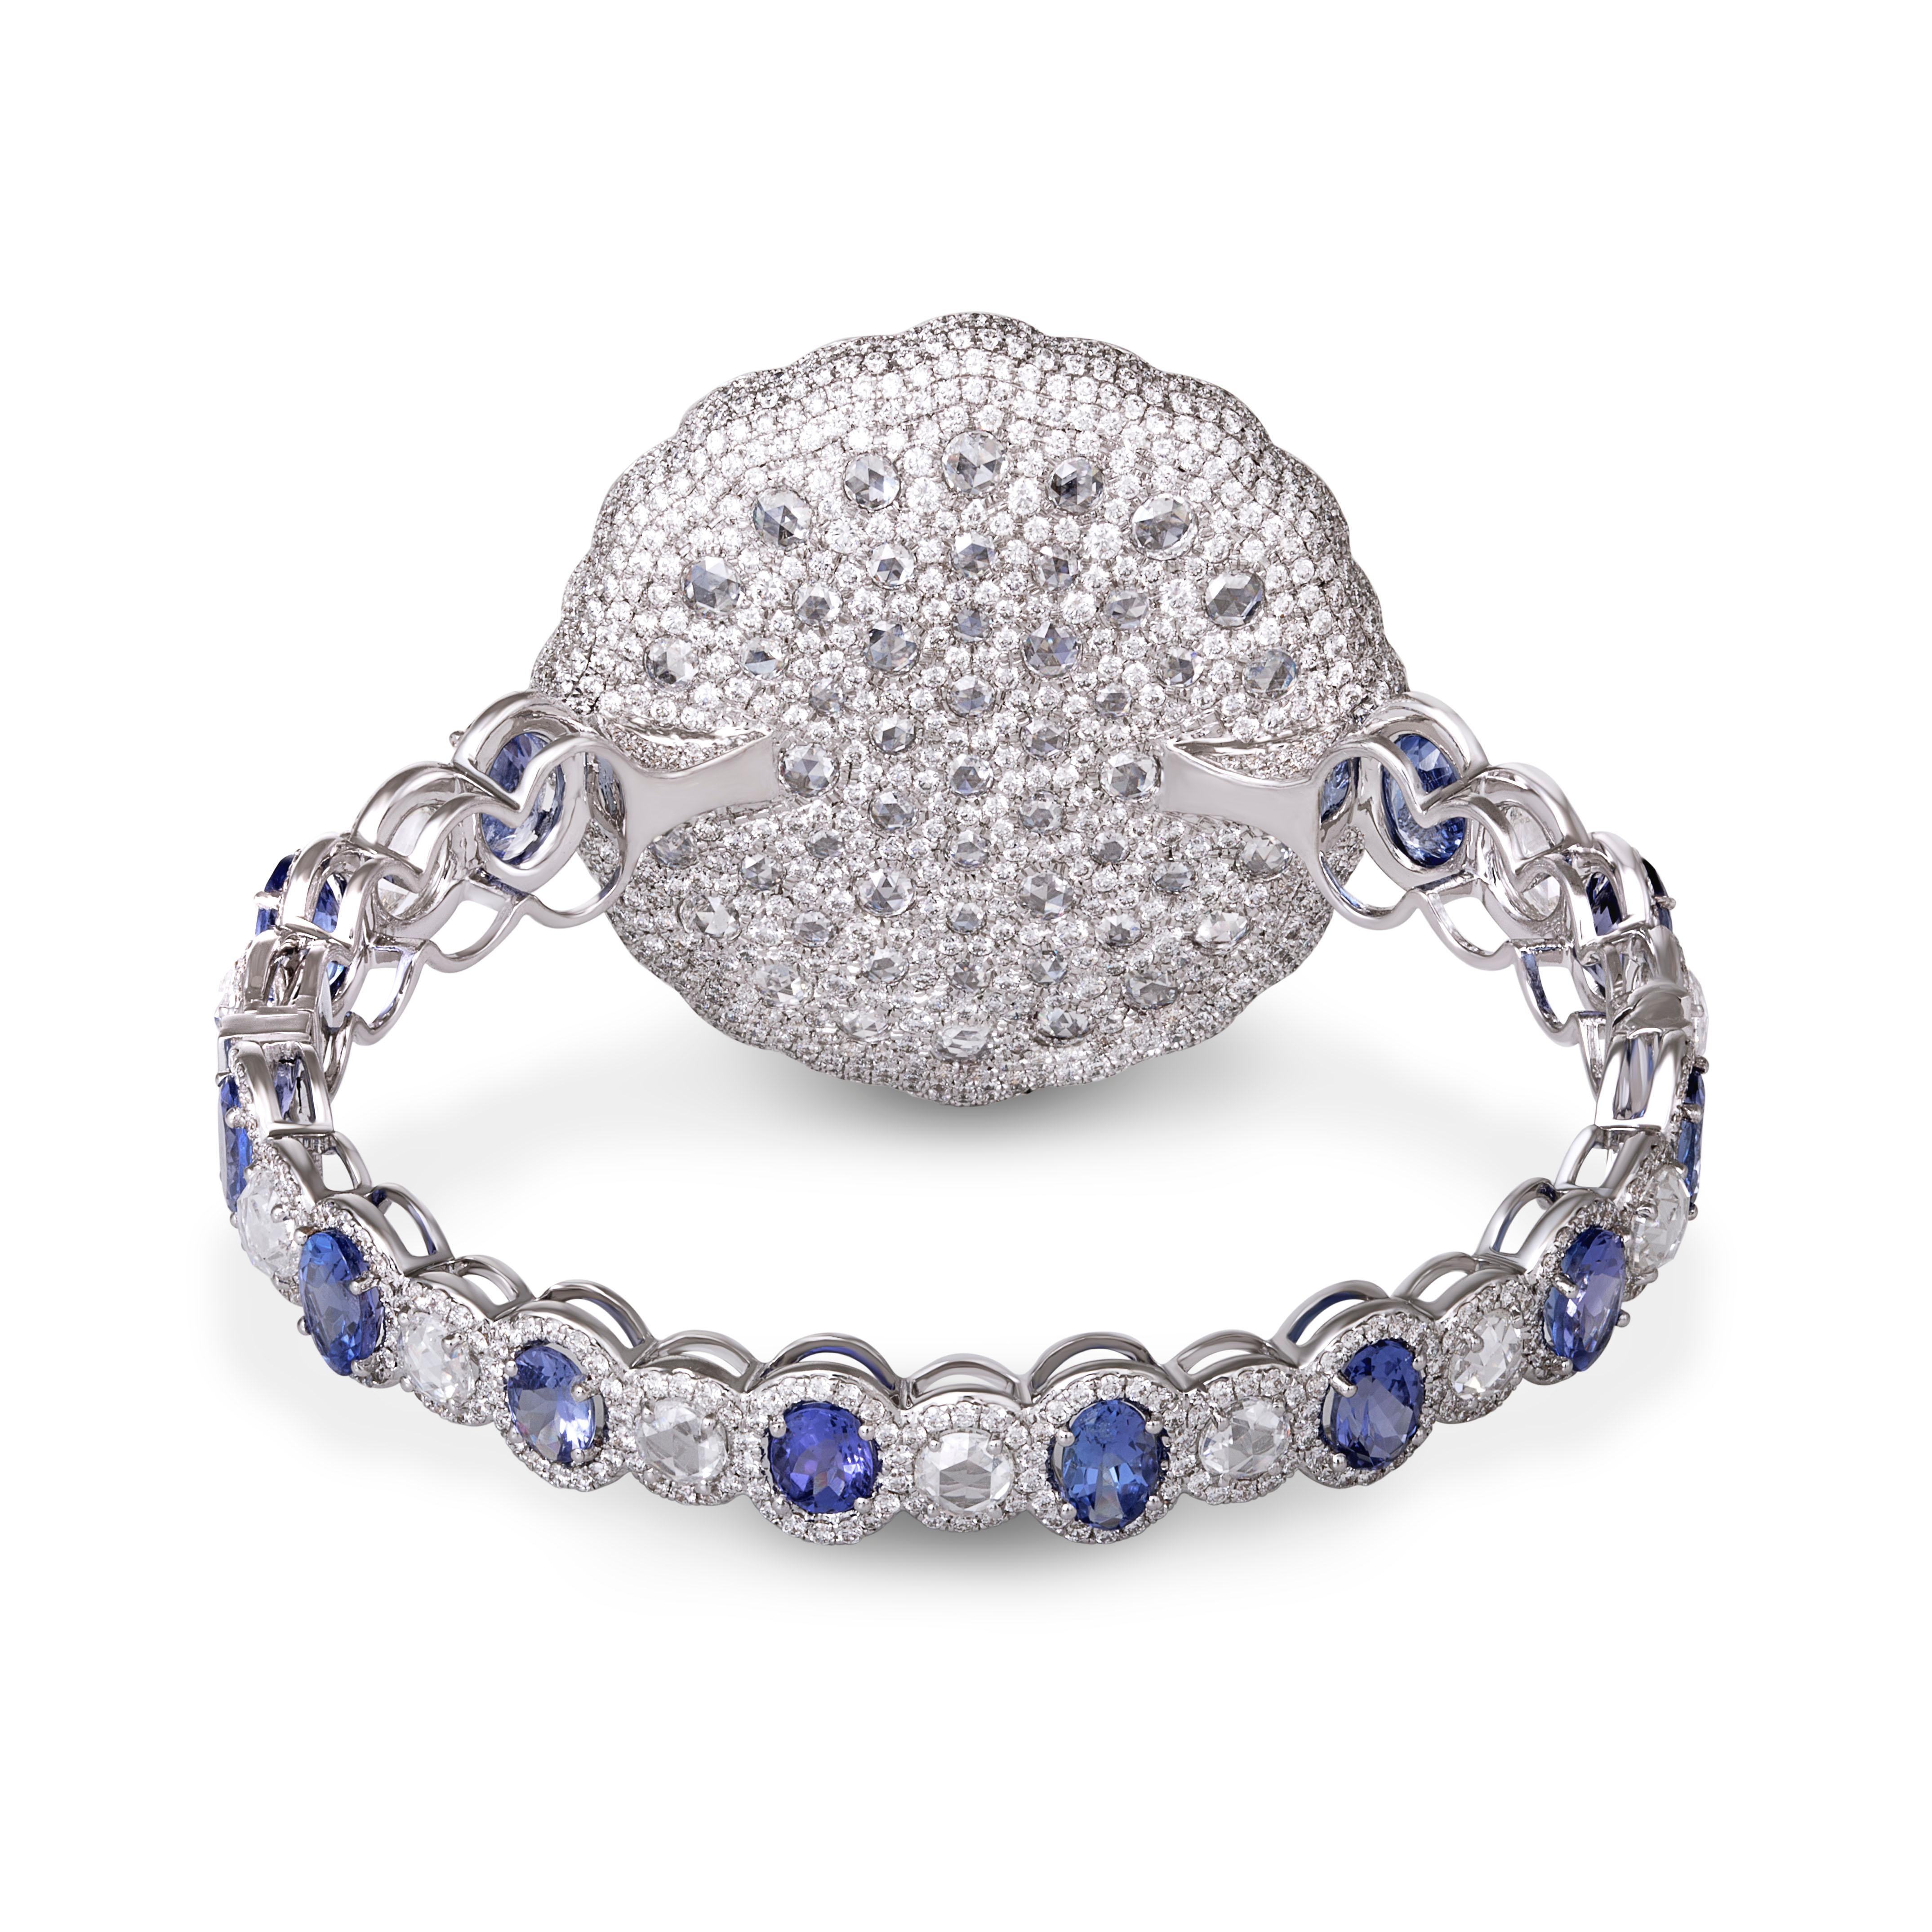 Consisting of a central deep blue-hued oval tanzanite, encased with rose-cut diamonds and a further 22 pear-shaped tanzanites, this striking bracelet combines colour, symmetry and finesse, to reinterpret the grace and beauty found in nature. 

Total